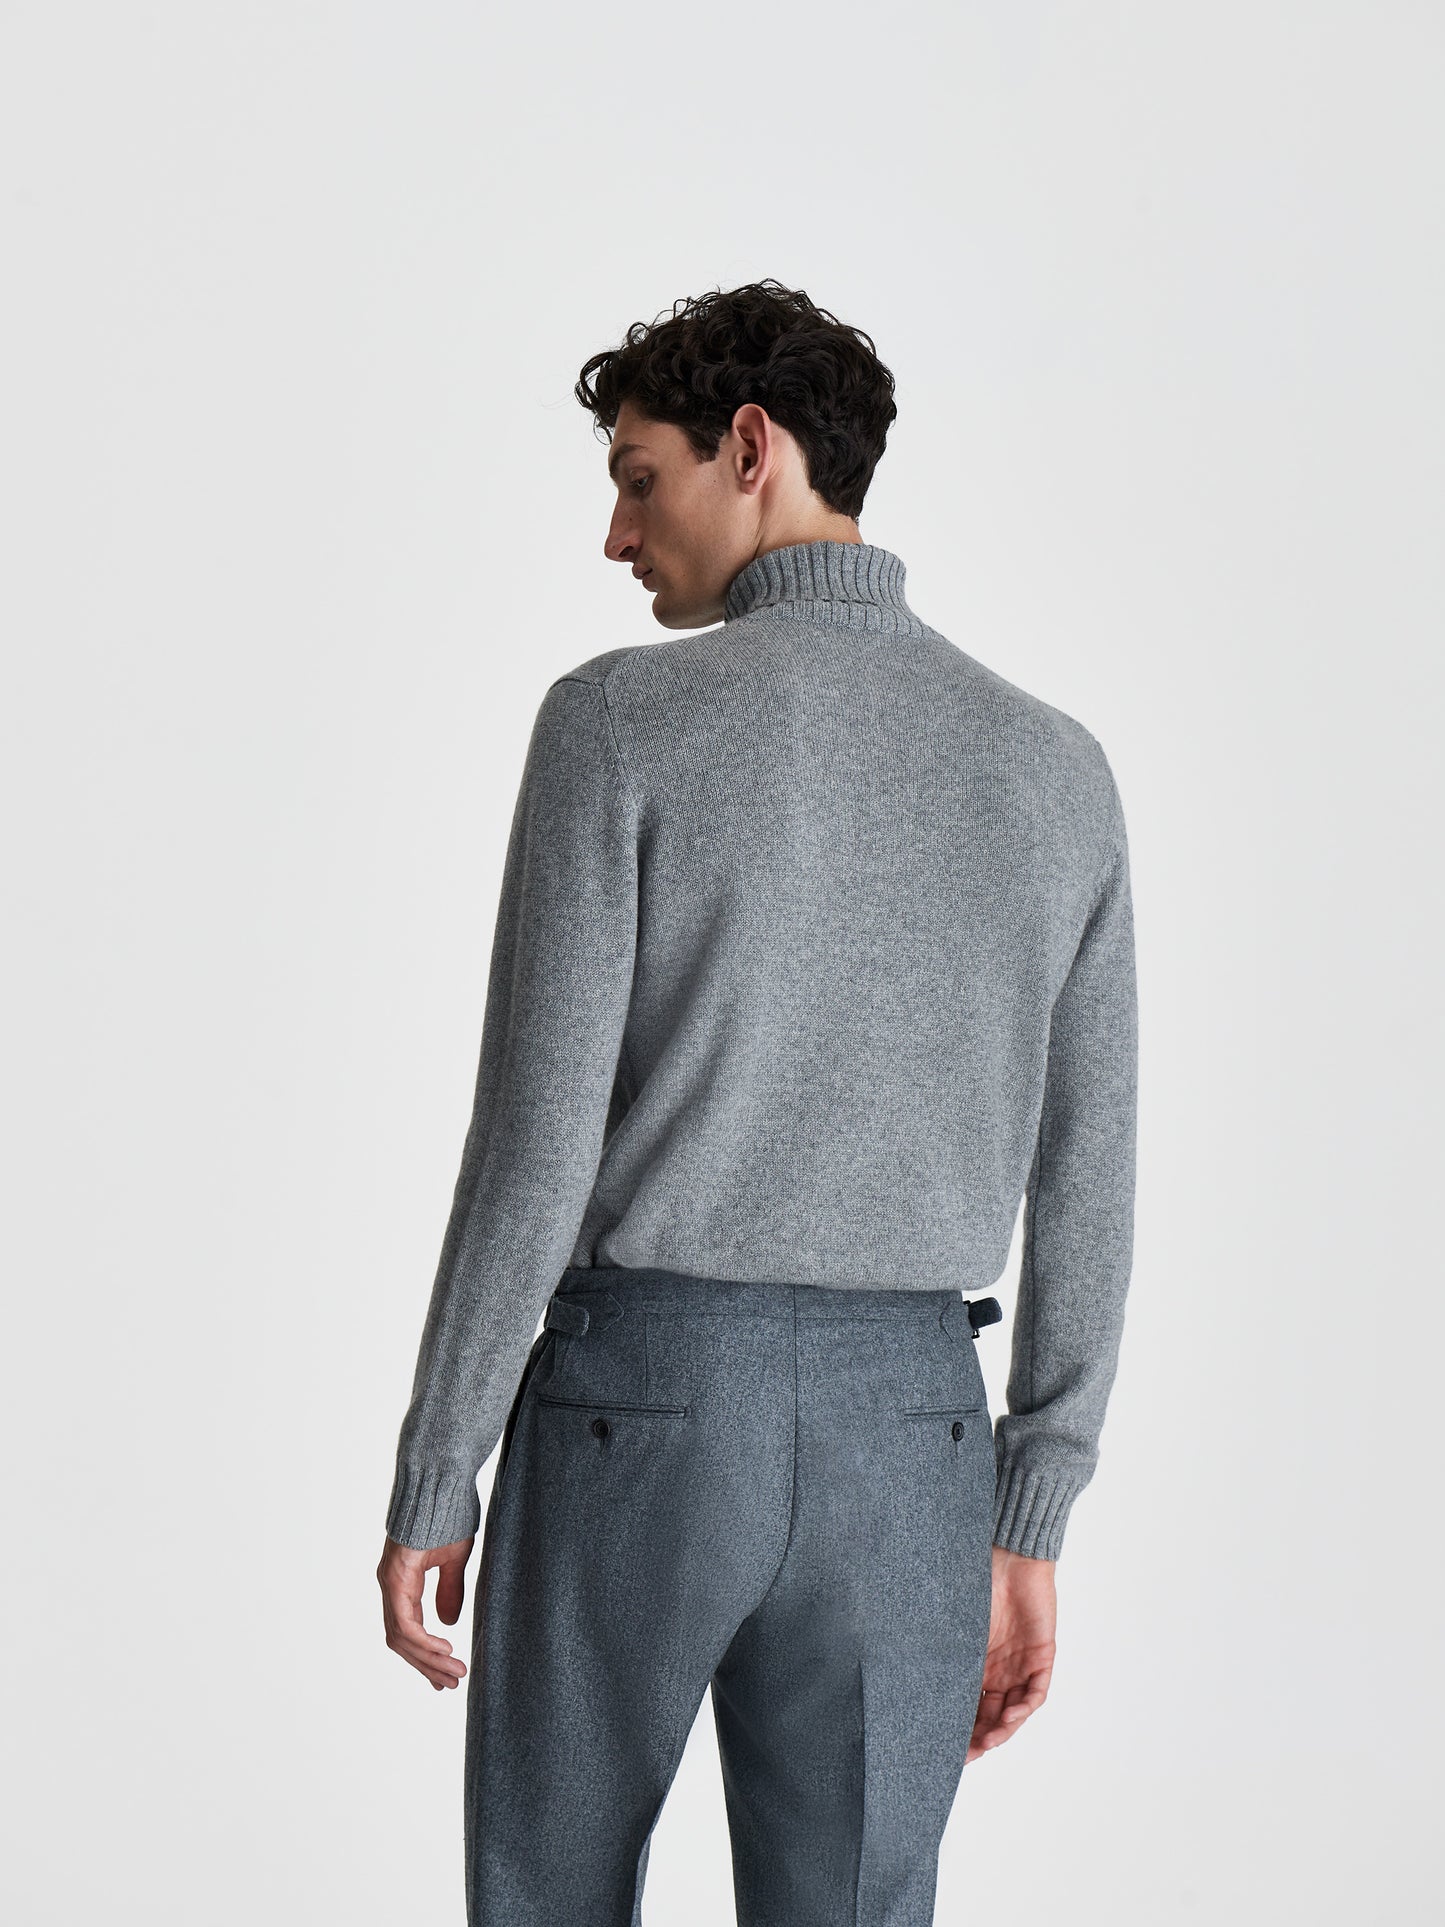 Cashmere Roll Neck Sweater Grey Back Mid Crop Model Image